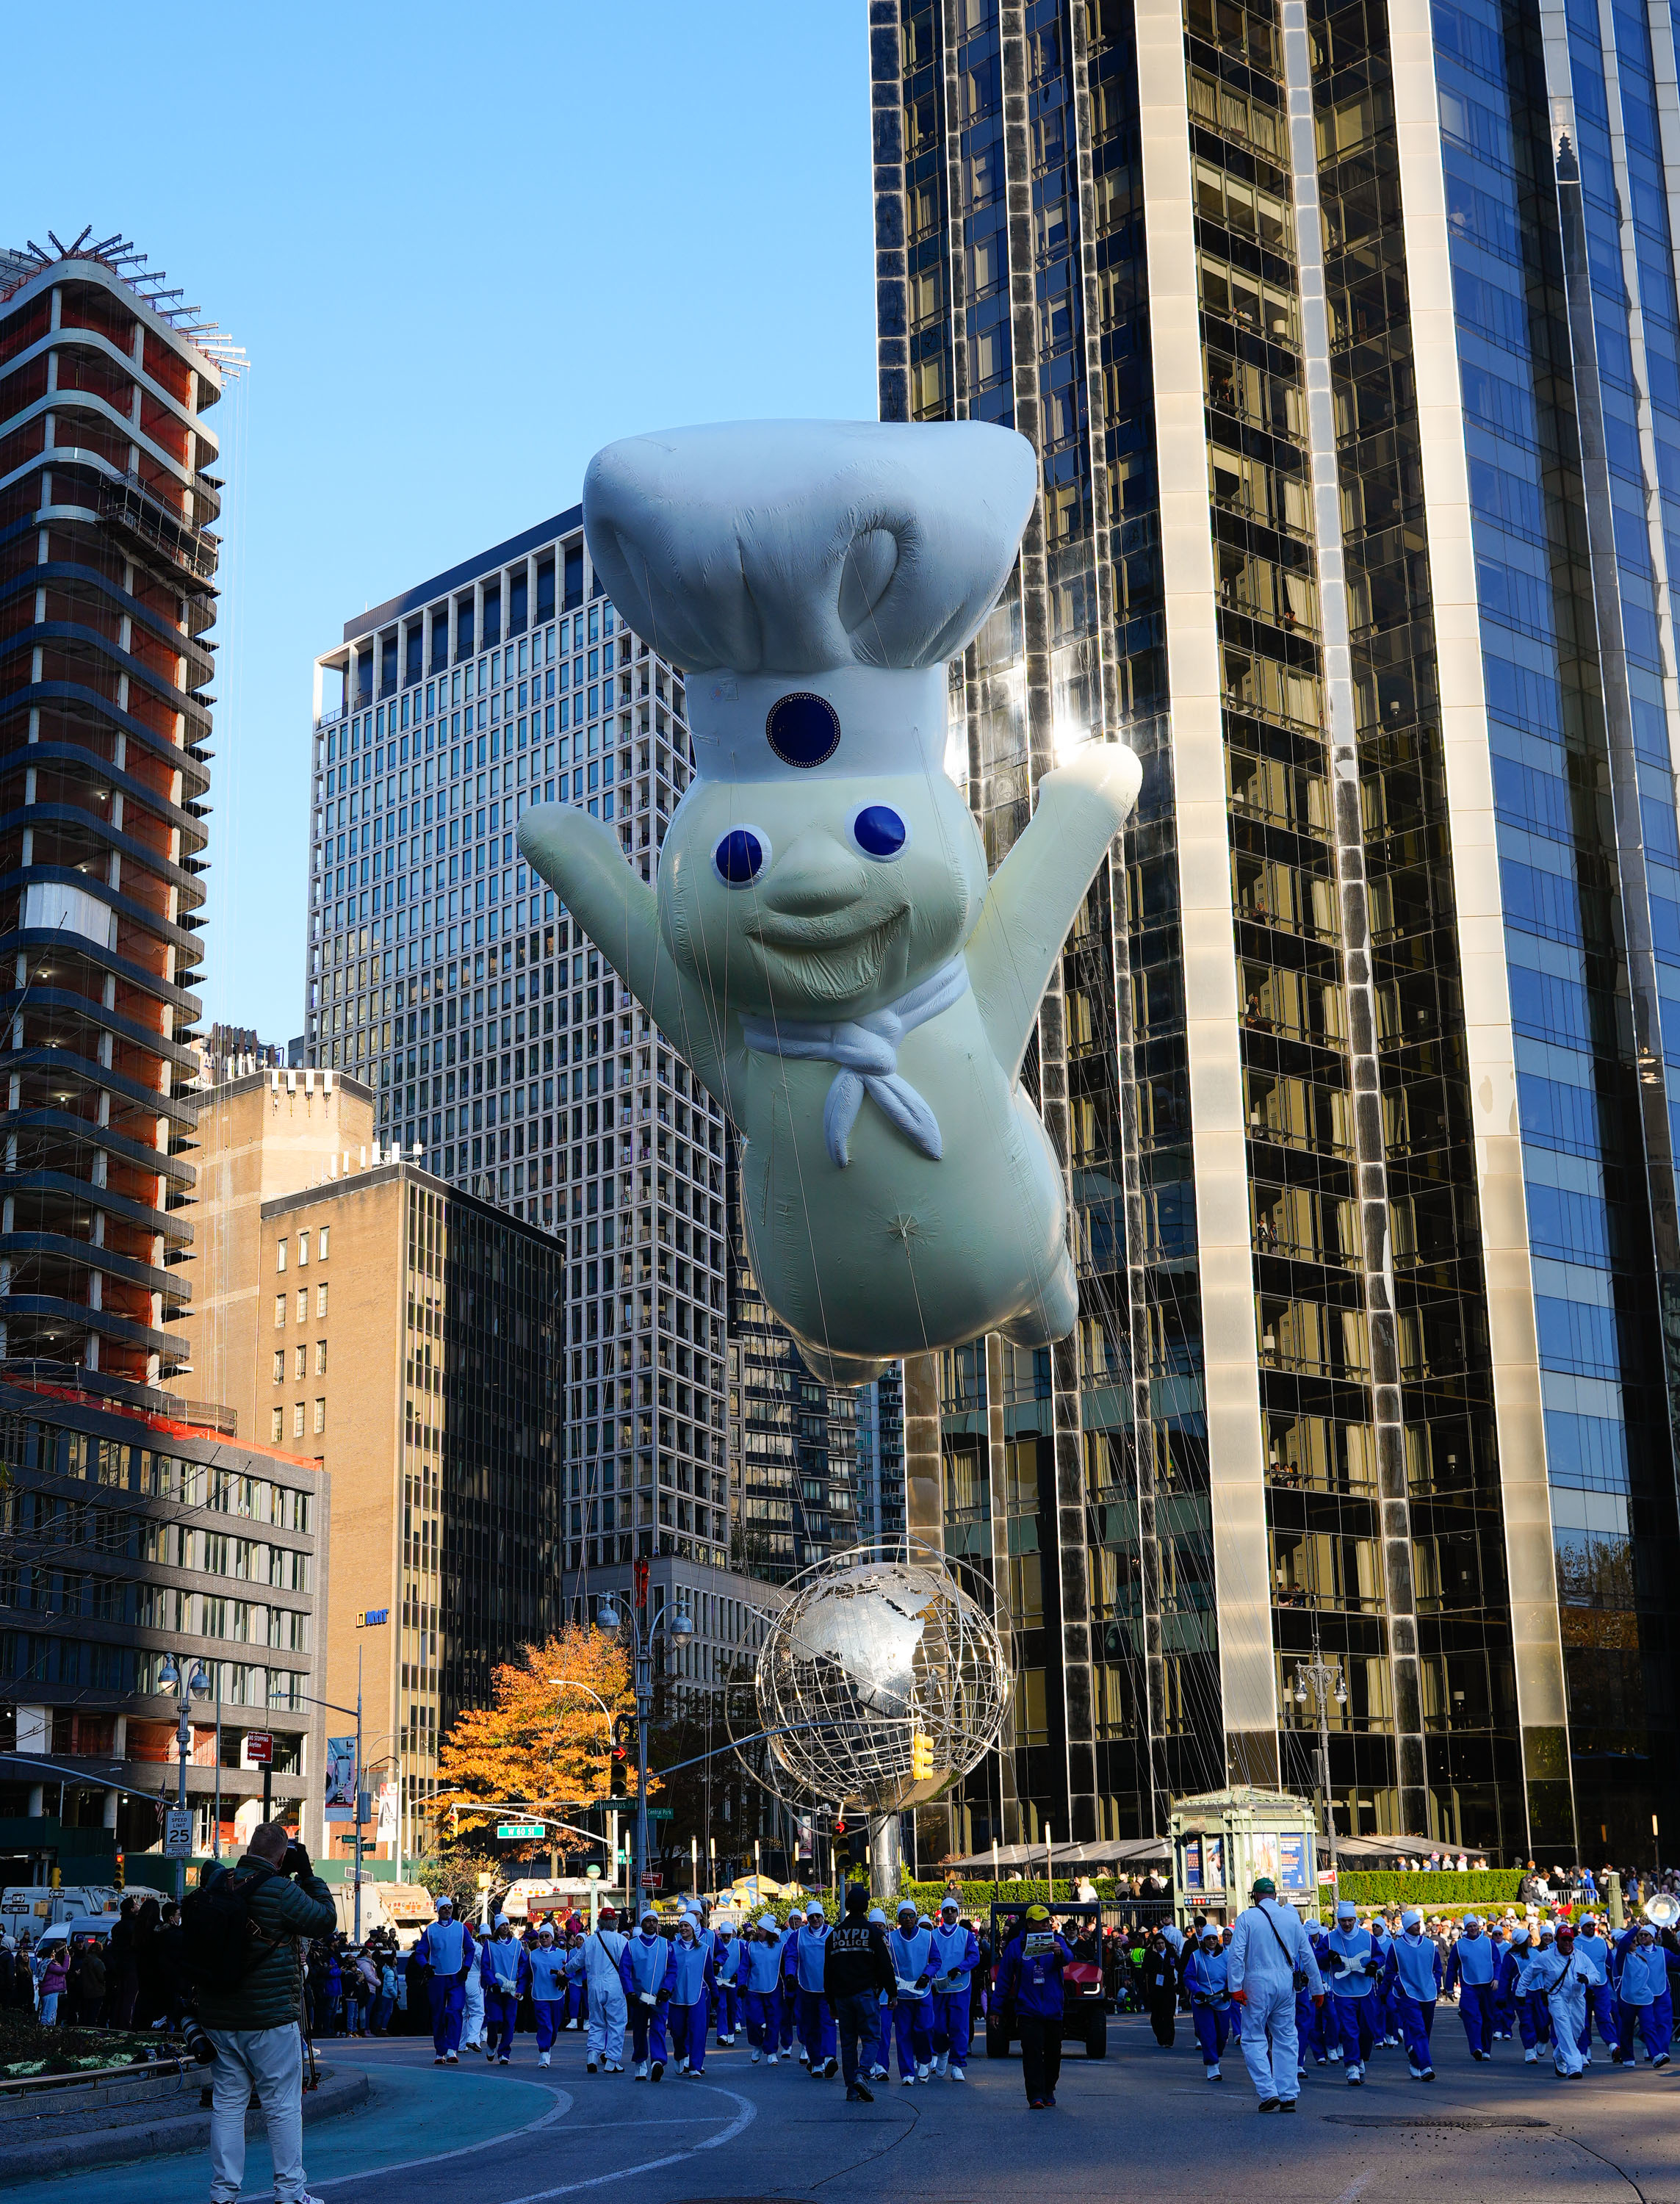 Pillsbury Doughboy balloon at the parade with his hands out